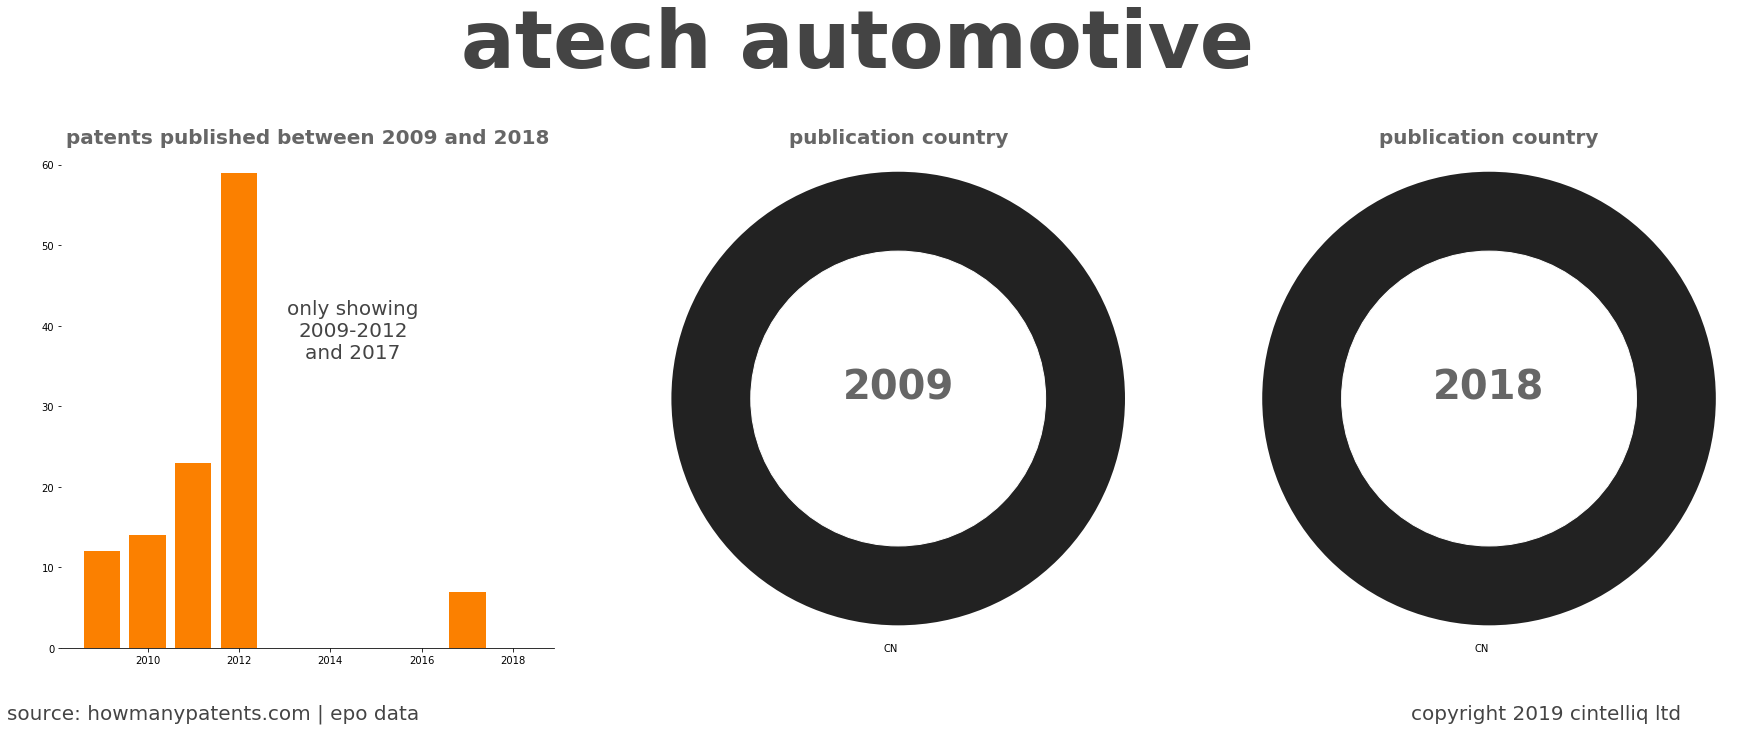 summary of patents for Atech Automotive 